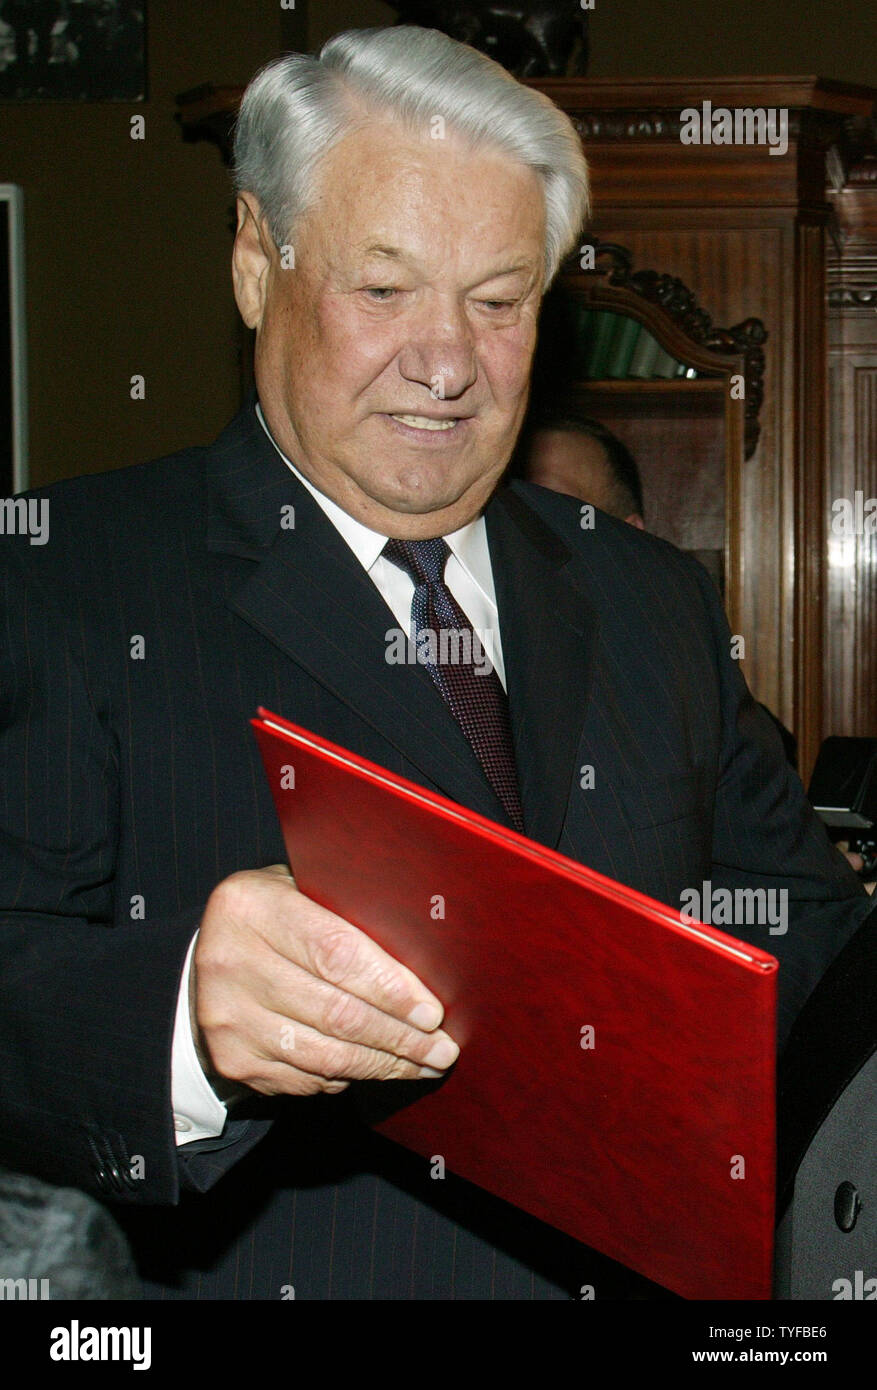 Former Russian President Boris Yeltsin, shown in this 2000 file photo, died at the age of 76 on April 23, 2007 in Moscow. Yeltsin pushed Russia to democracy and a market economy after helping in the collapse of the Soviet Union communist state in 1991. In this file photo, Former Russian President Boris Yeltsin attends a celebration of Lencom theater in Moscow on October 24, 2003. (UPI Photo/Anatoli Zhdanov) Stock Photo